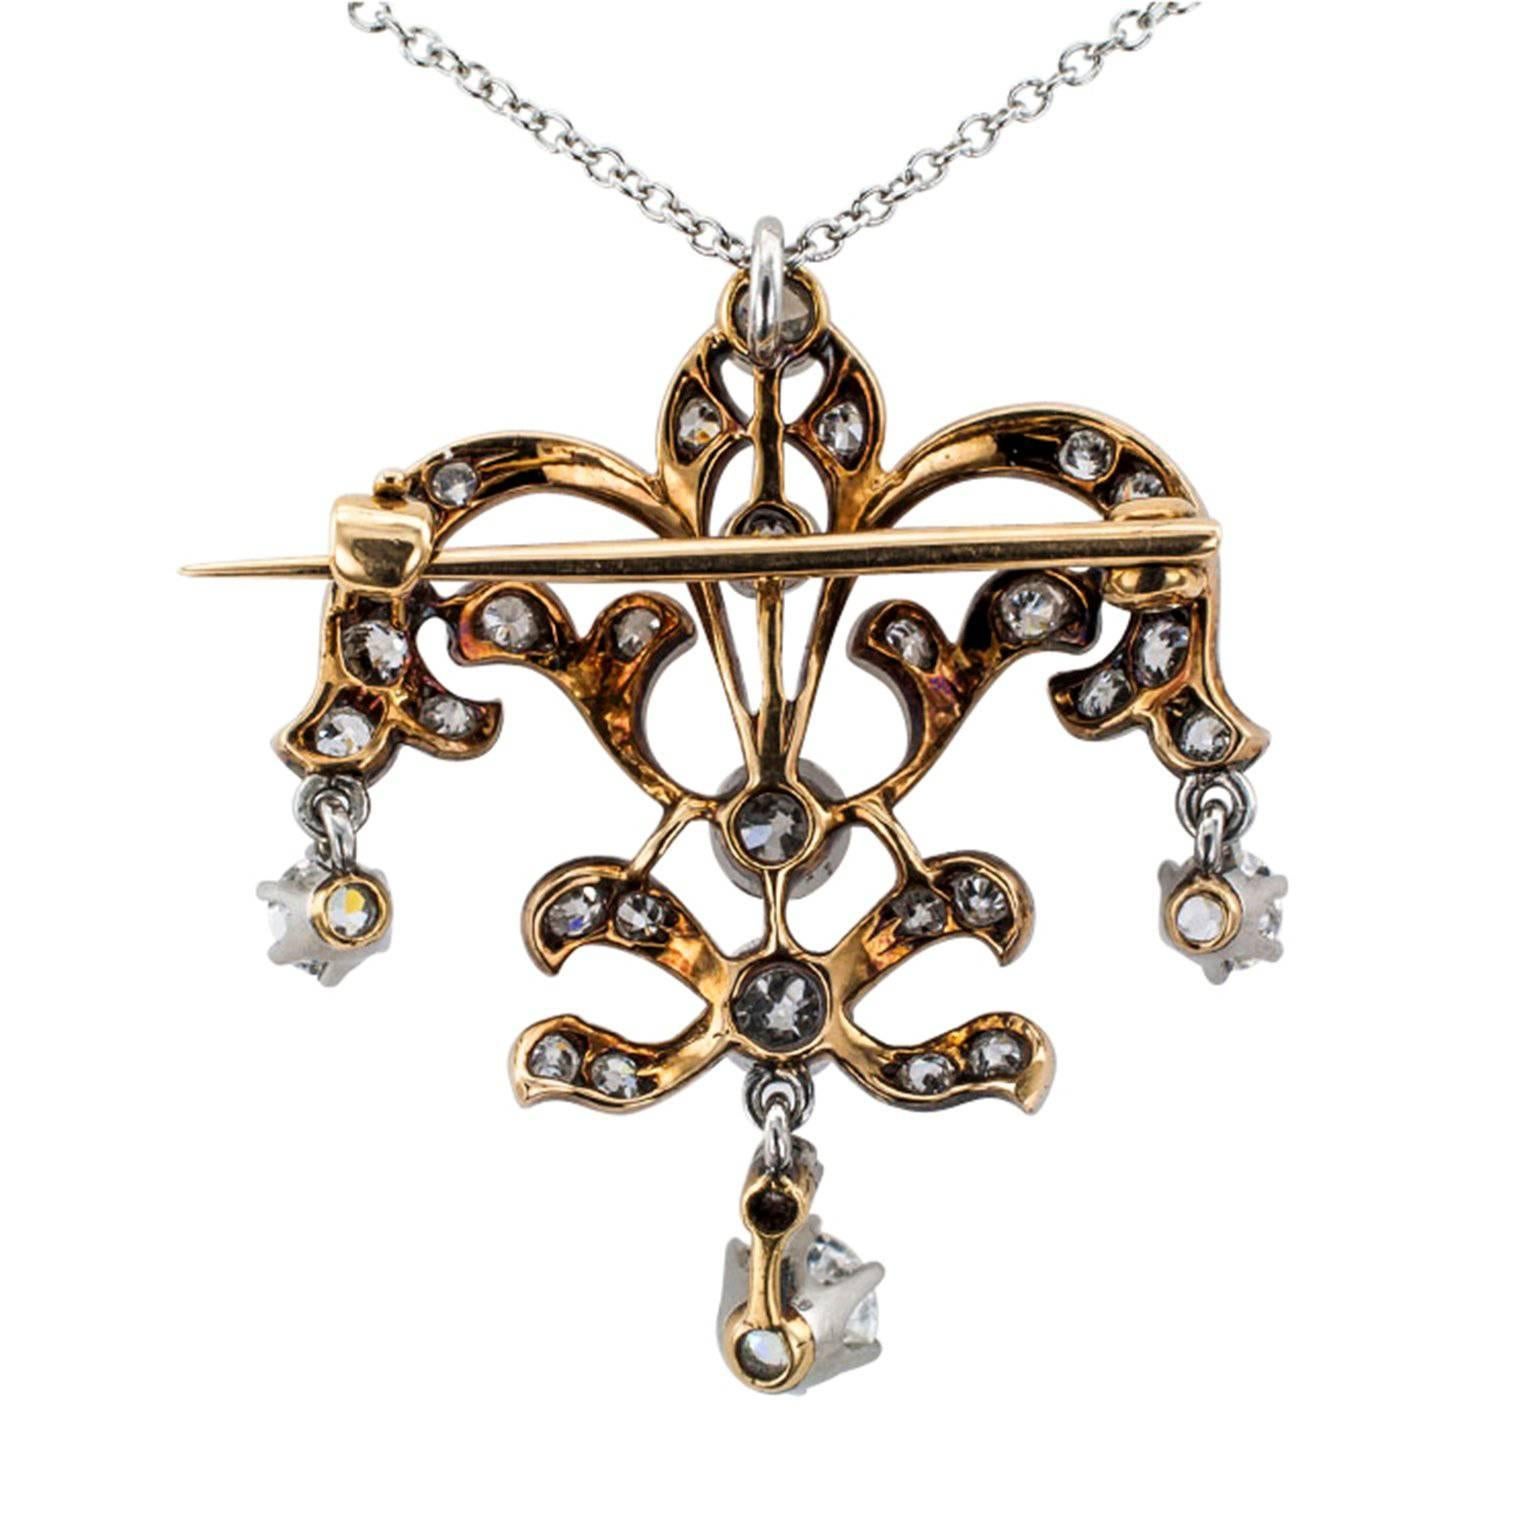 Edwardian Platinum and Gold Diamond Brooch/Pendant

Platinum and 14-karat yellow gold lavaliere-brooch set with diamonds totaling approximately 1.25 carats, circa 1910.  An open work design composed by scrolling motifs completed by a trio of